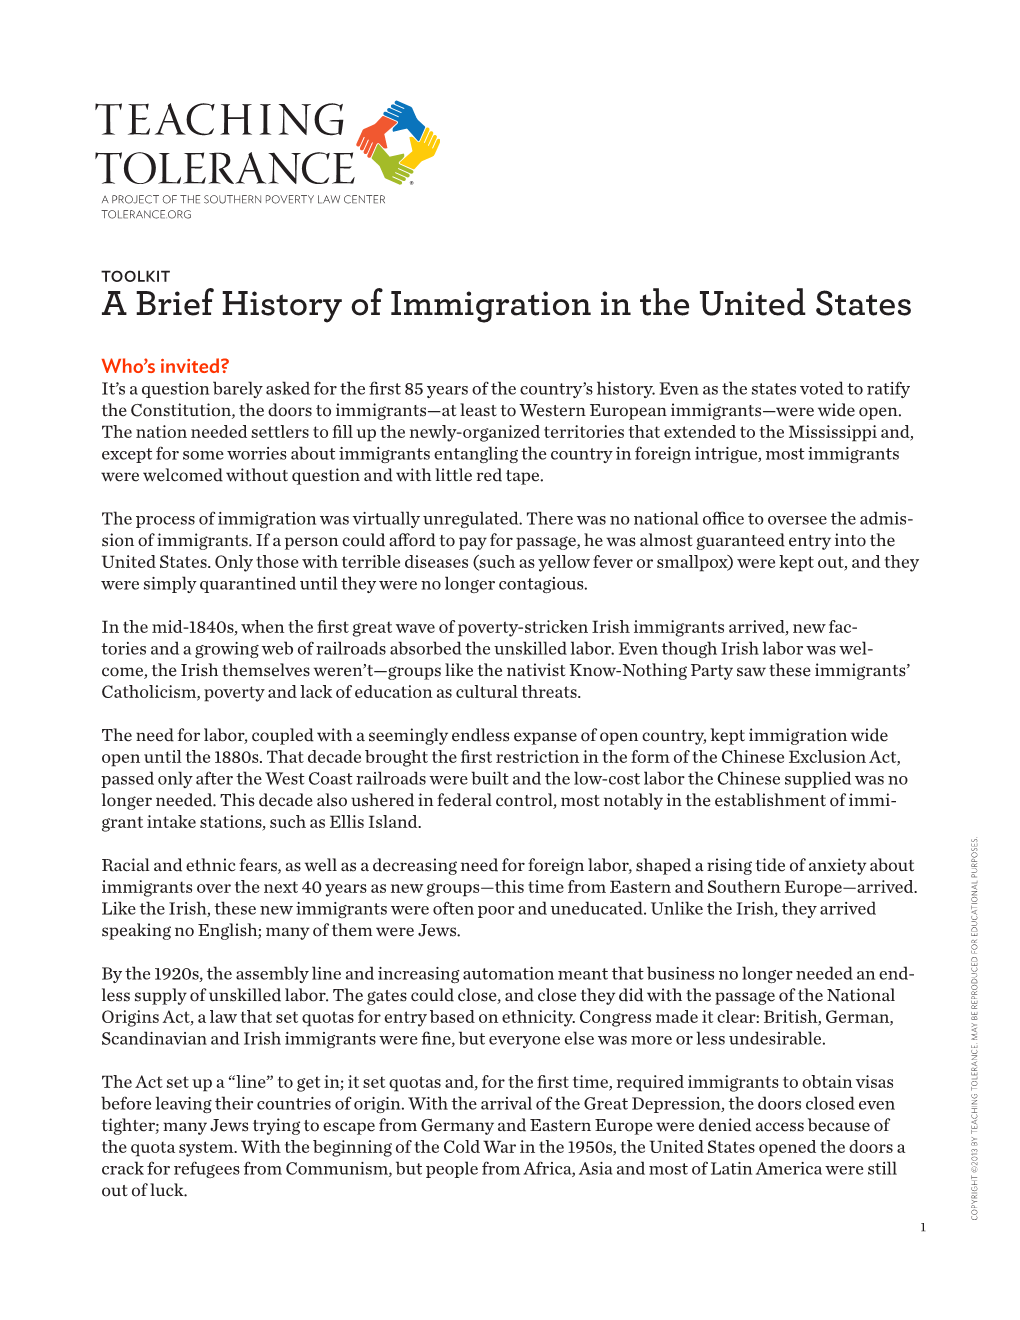 A Brief History of Immigration in the United States